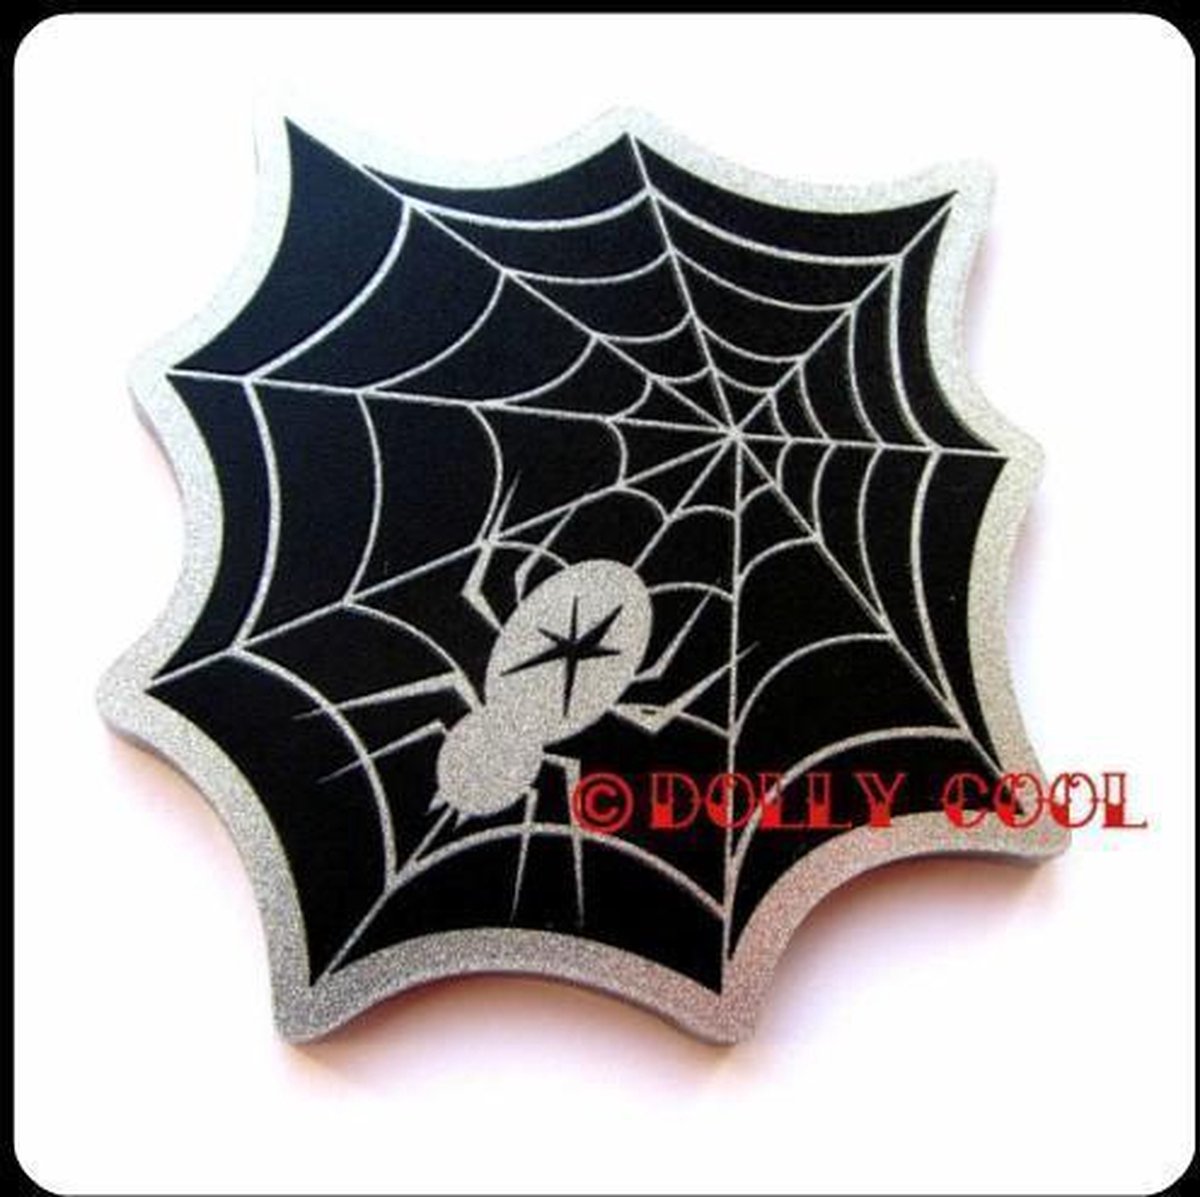 Dolly Cool - spider web - broche